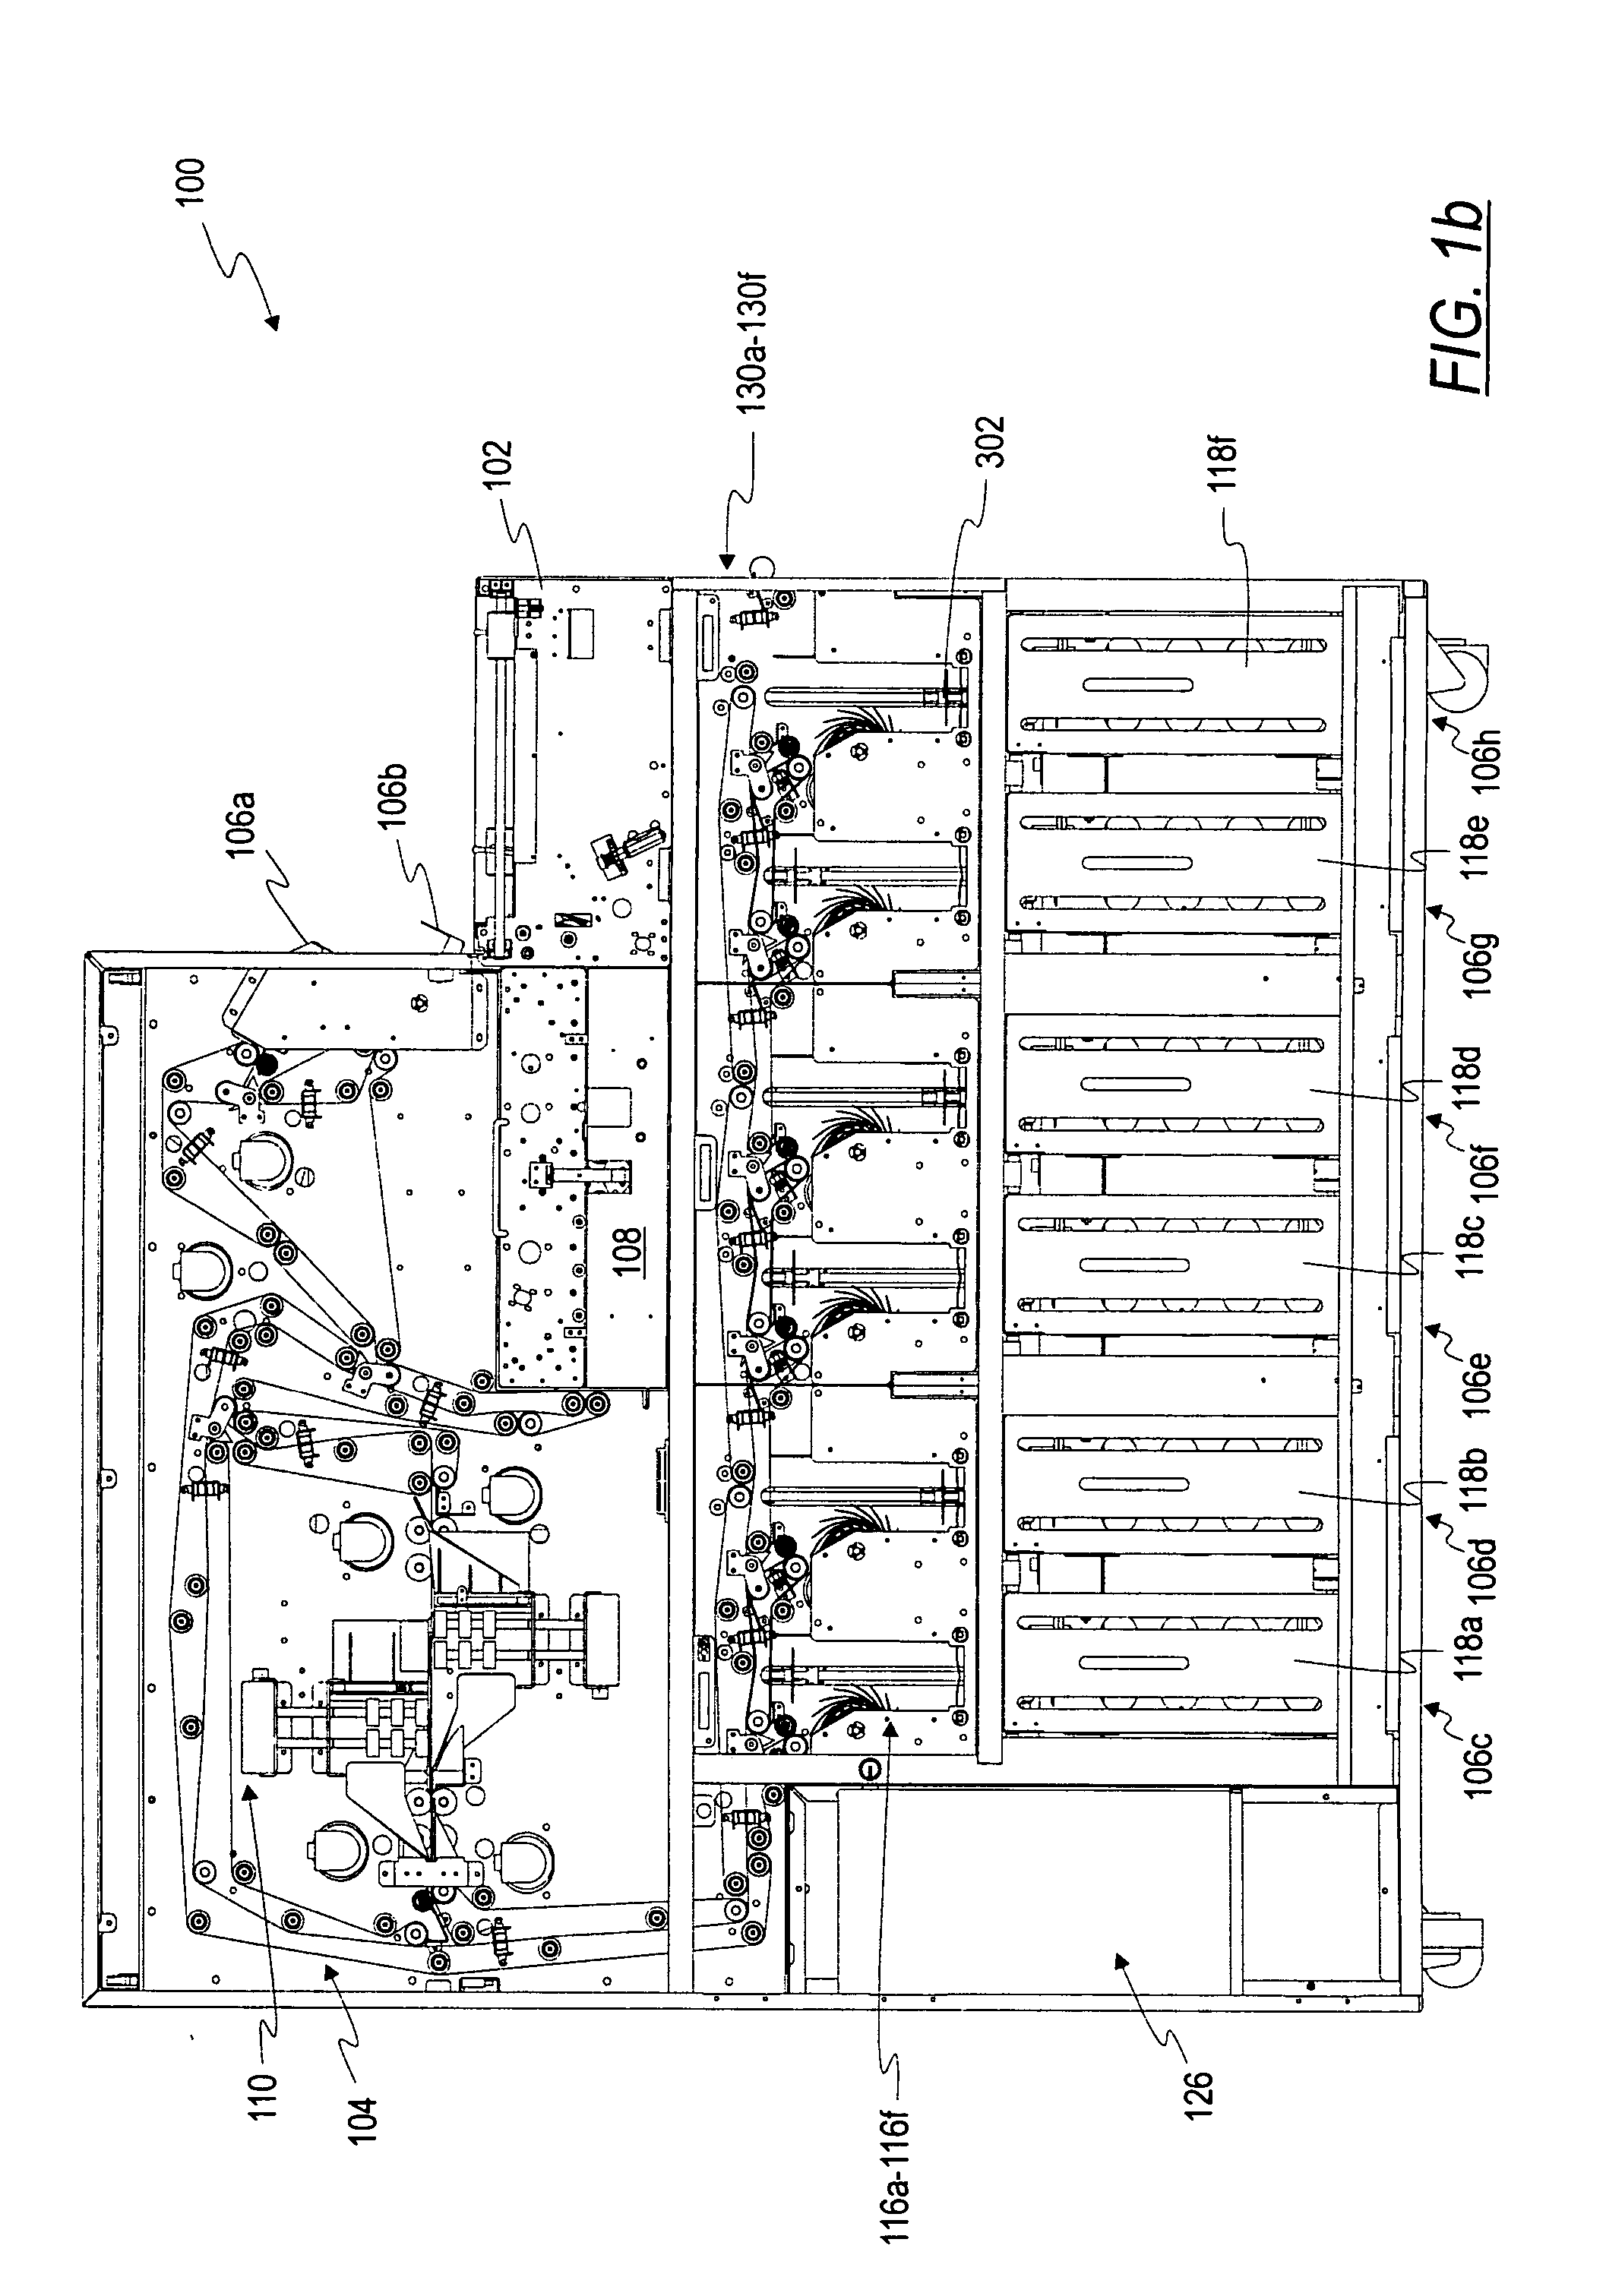 Currency processing and strapping systems and methods